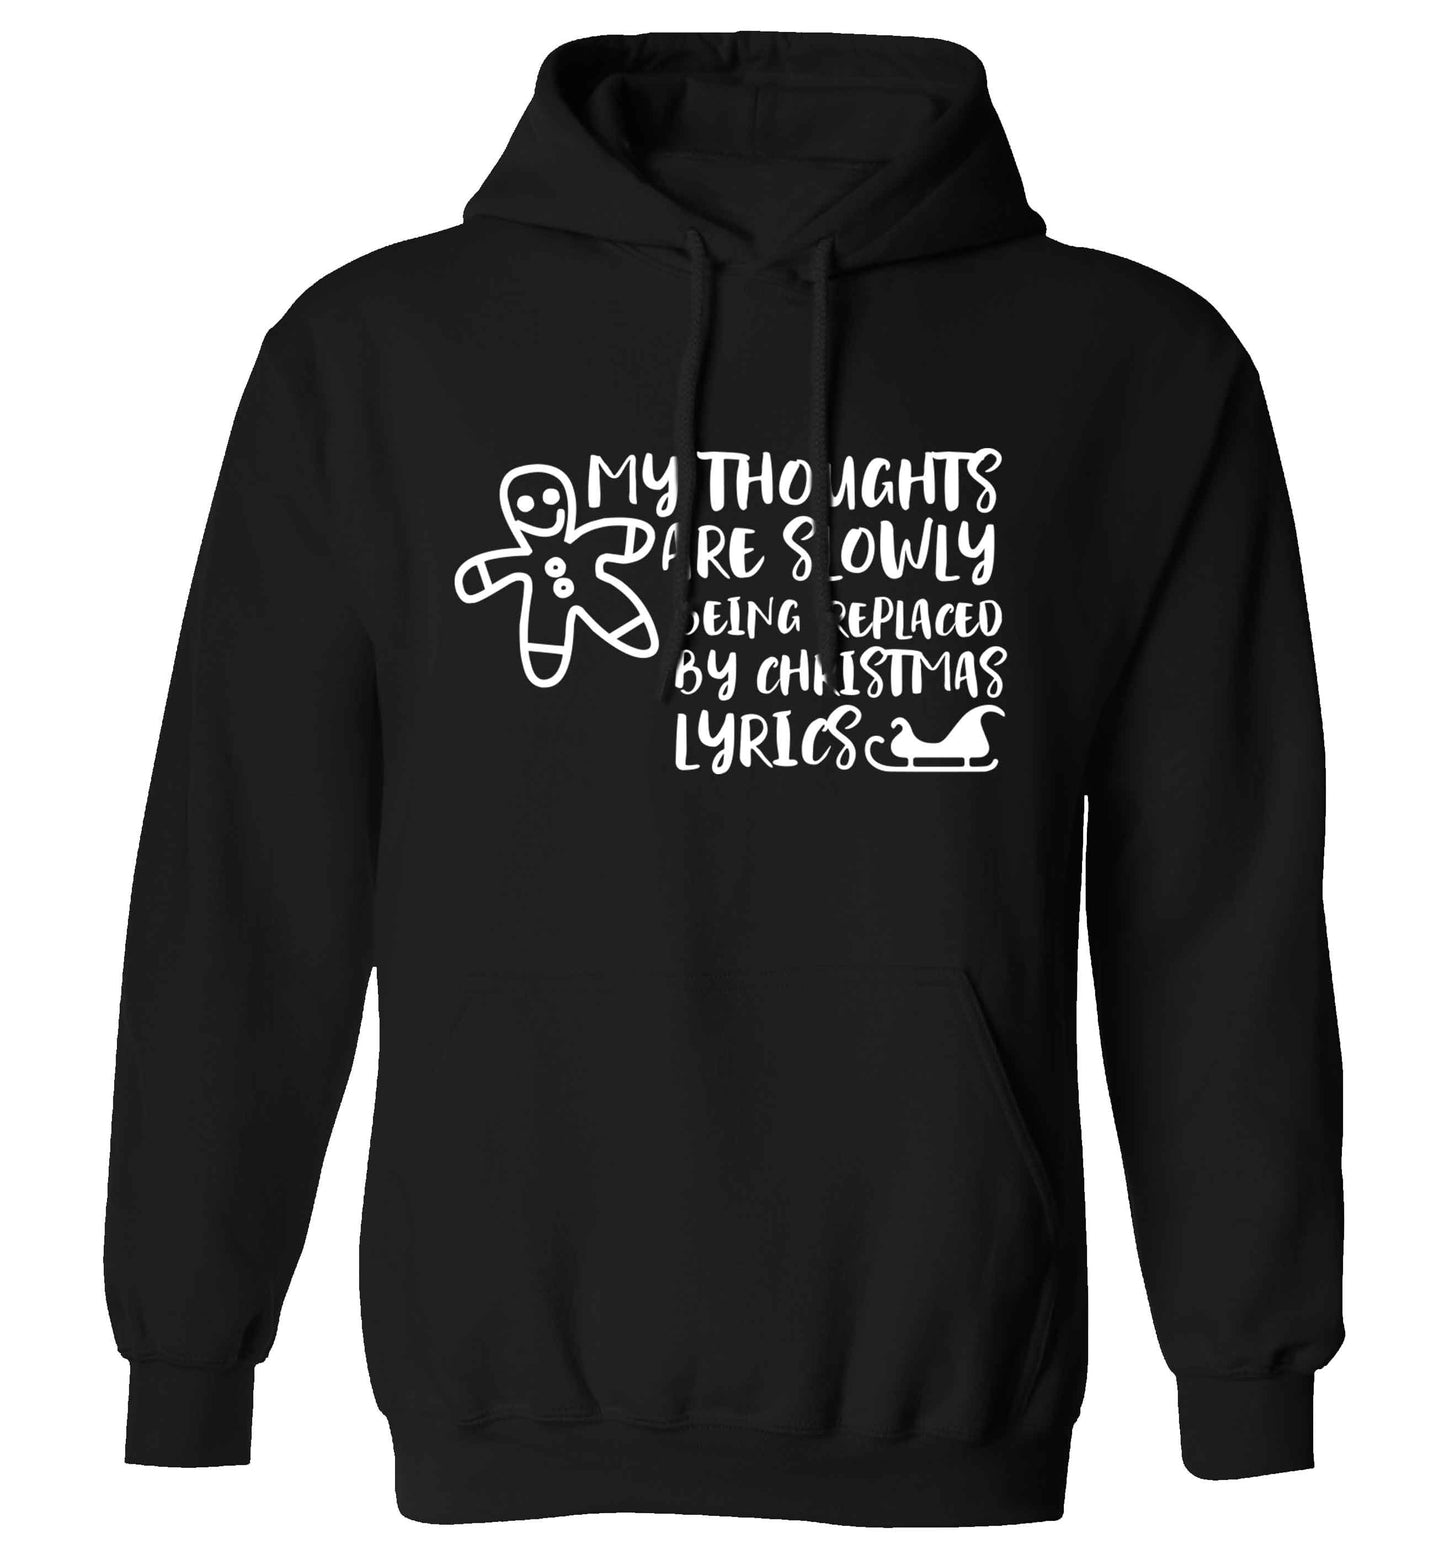 My thoughts are slowly being replaced by Christmas lyrics adults unisex black hoodie 2XL